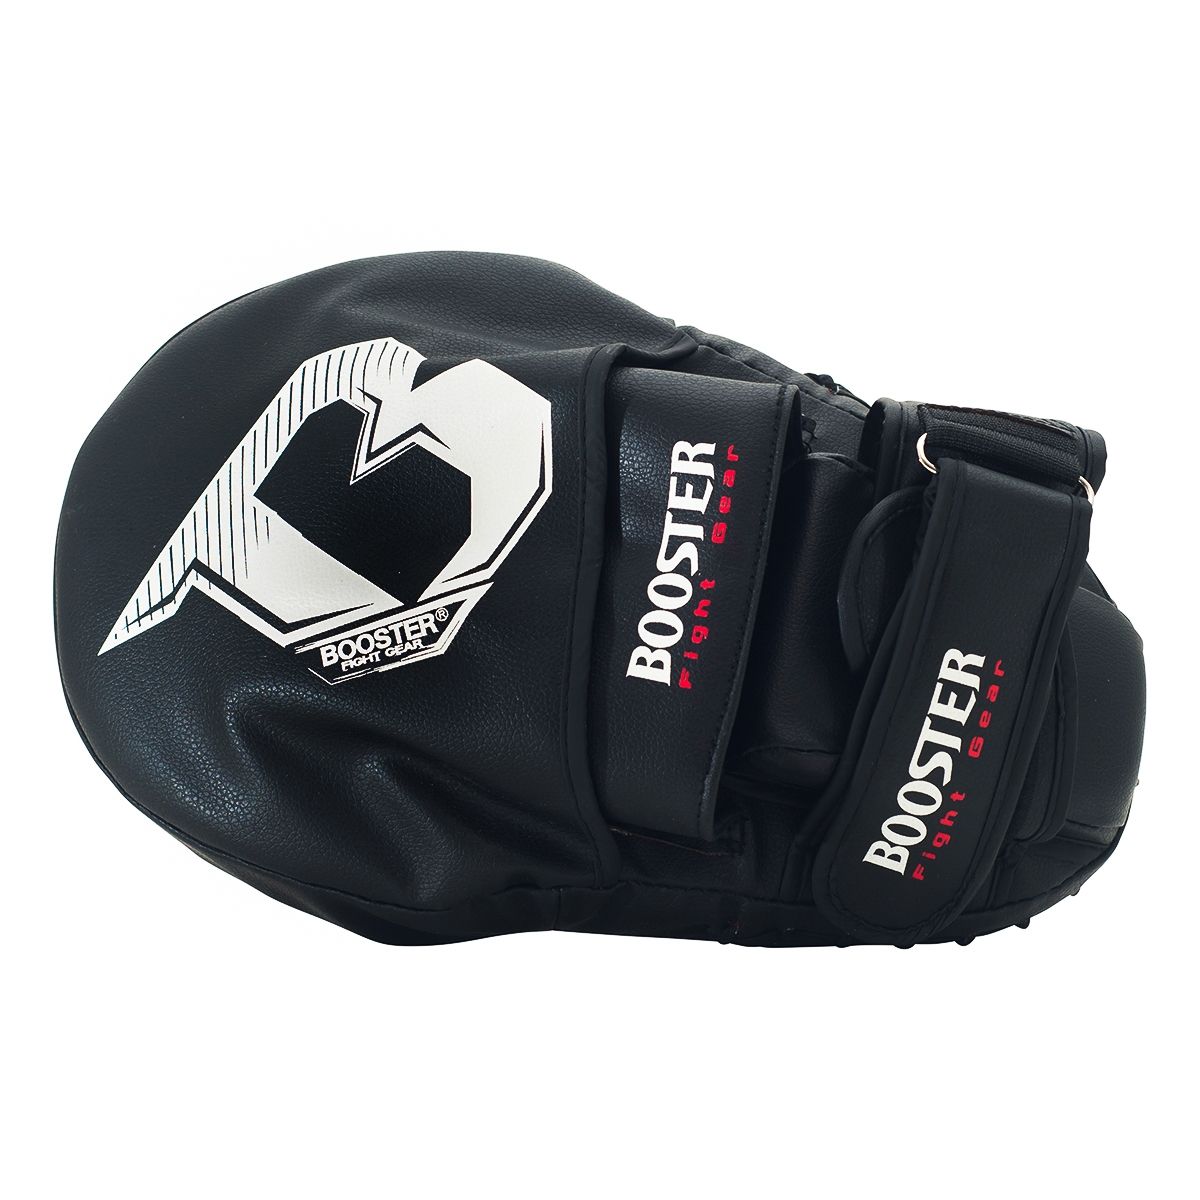 Booster Fightgear - Pads - PML Extreme